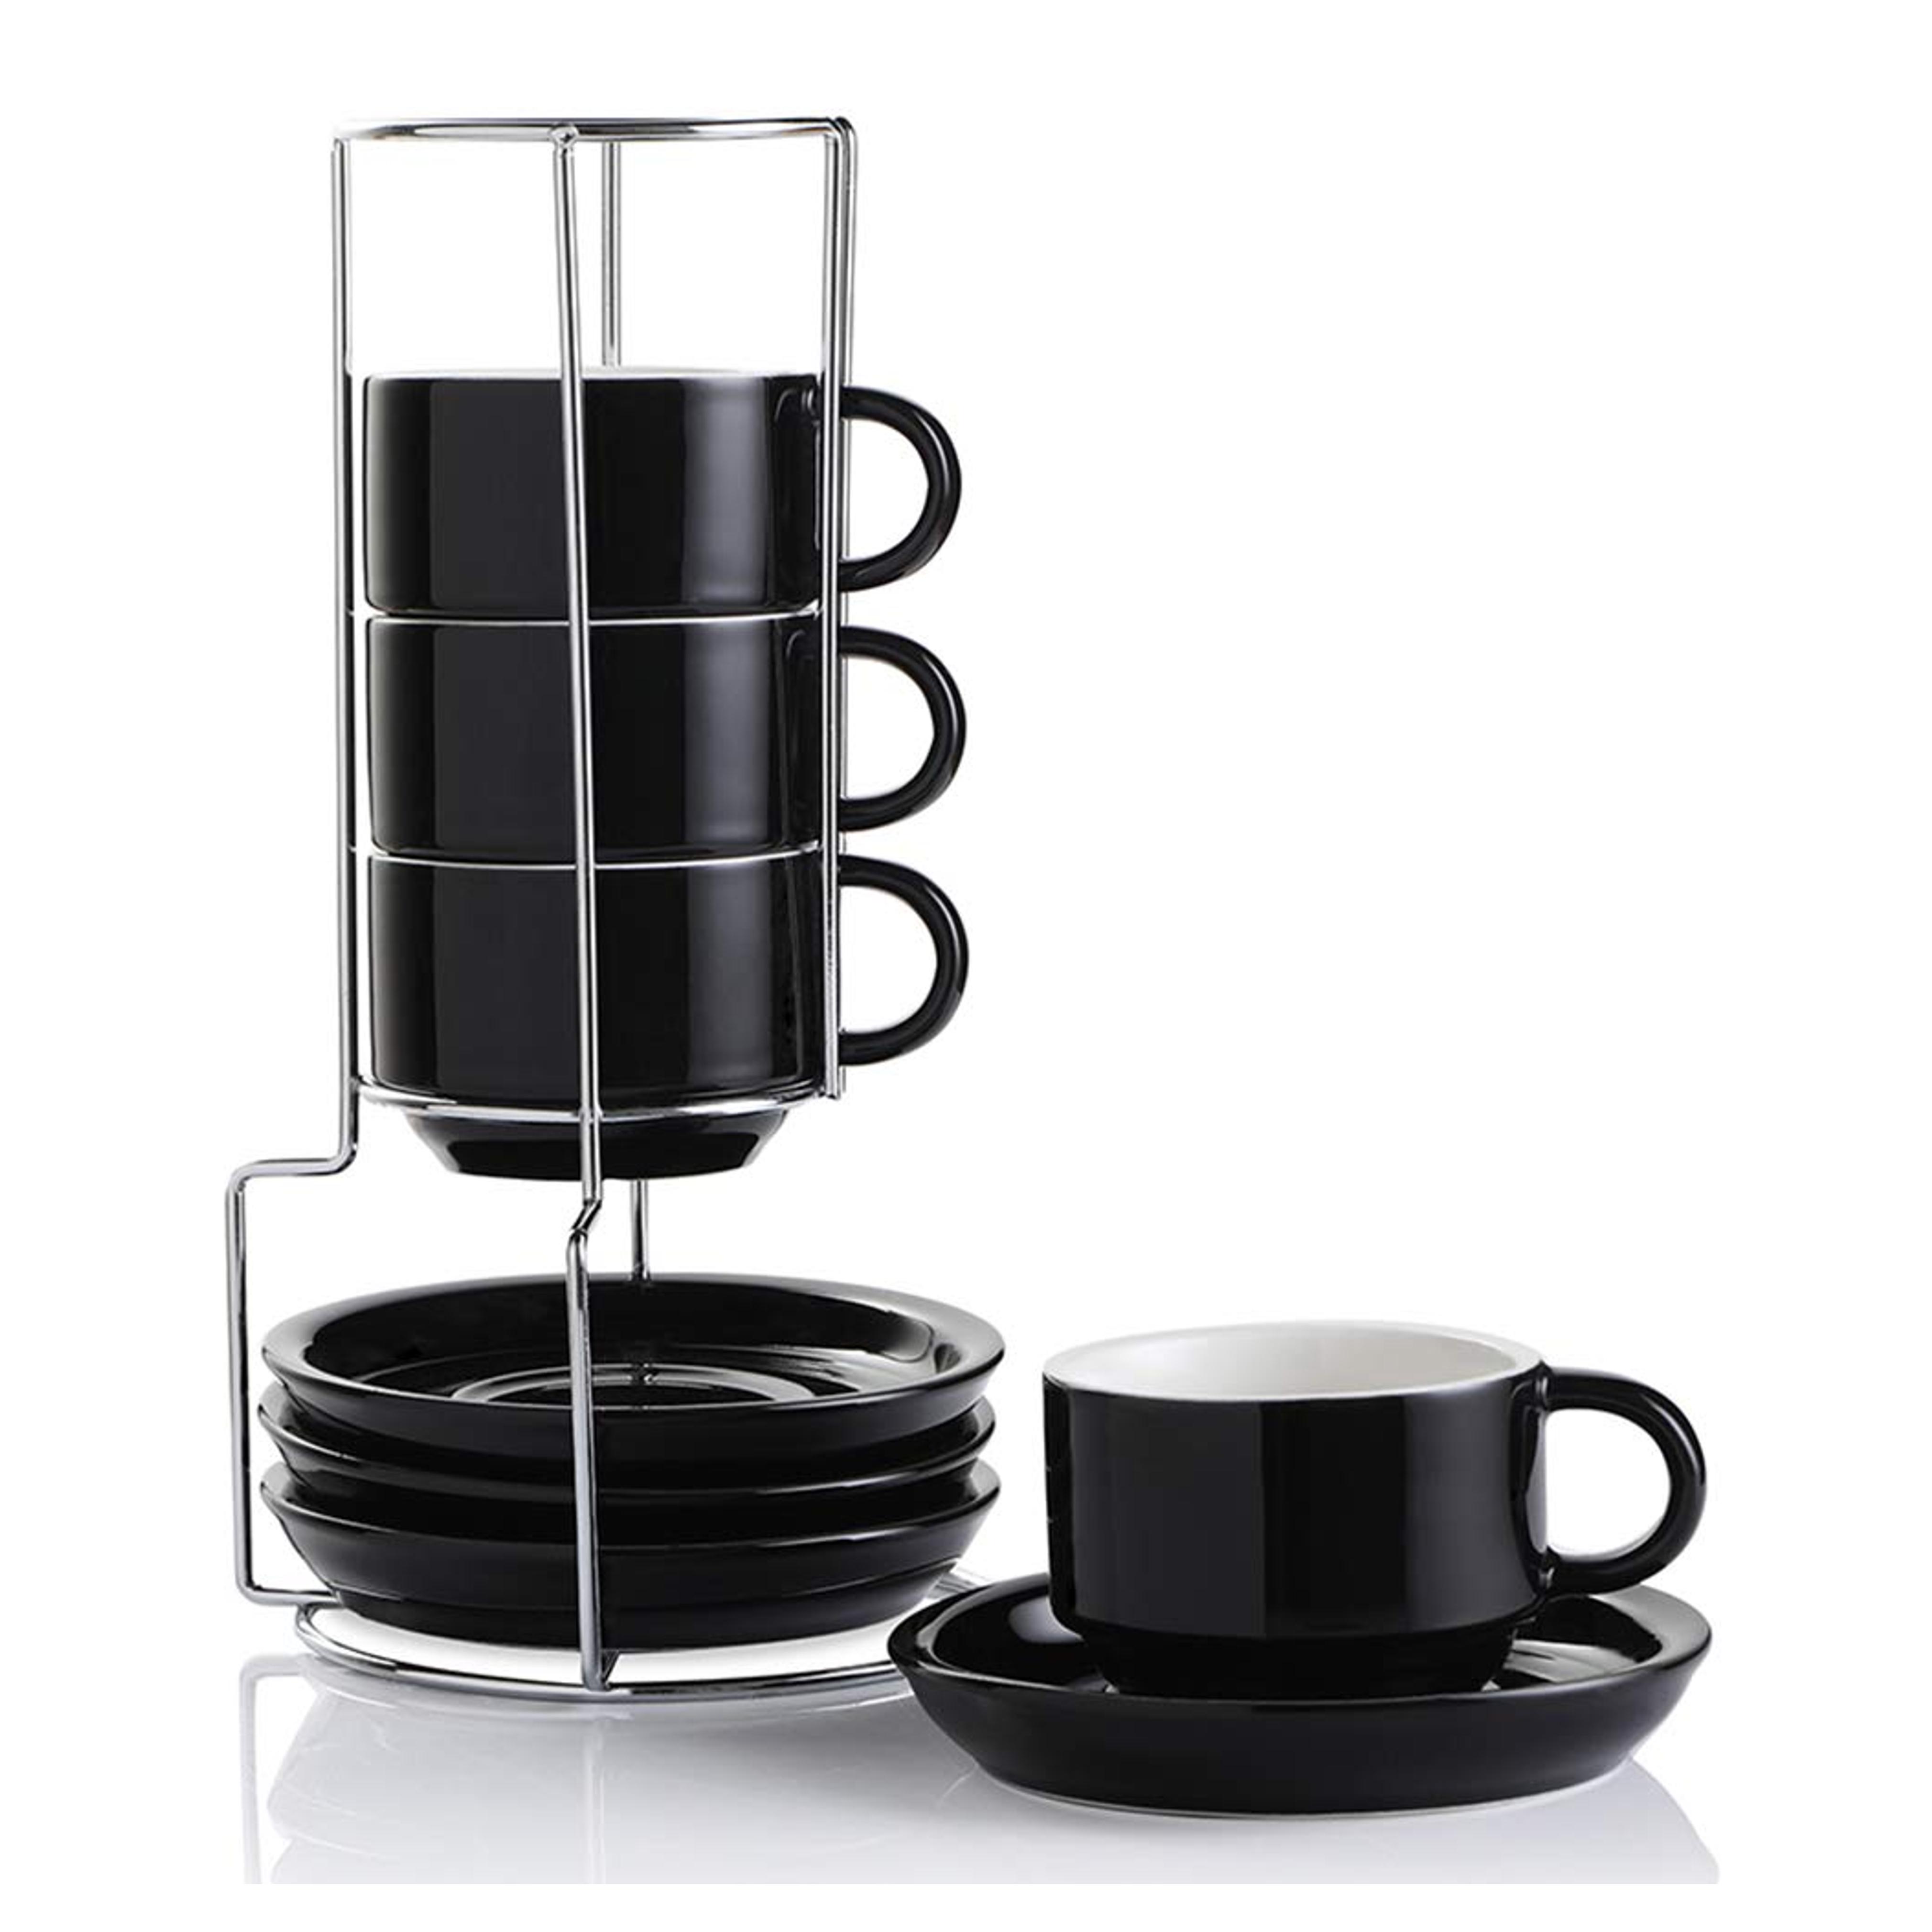 Amazon.com | SWEEJAR Porcelain Espresso Cups with Saucers, 4 Ounce Stackable Cappuccino Cups with Metal Stand for Coffee Drinks, Latte, Tea - Set of 4 (Black): Cup & Saucer Sets